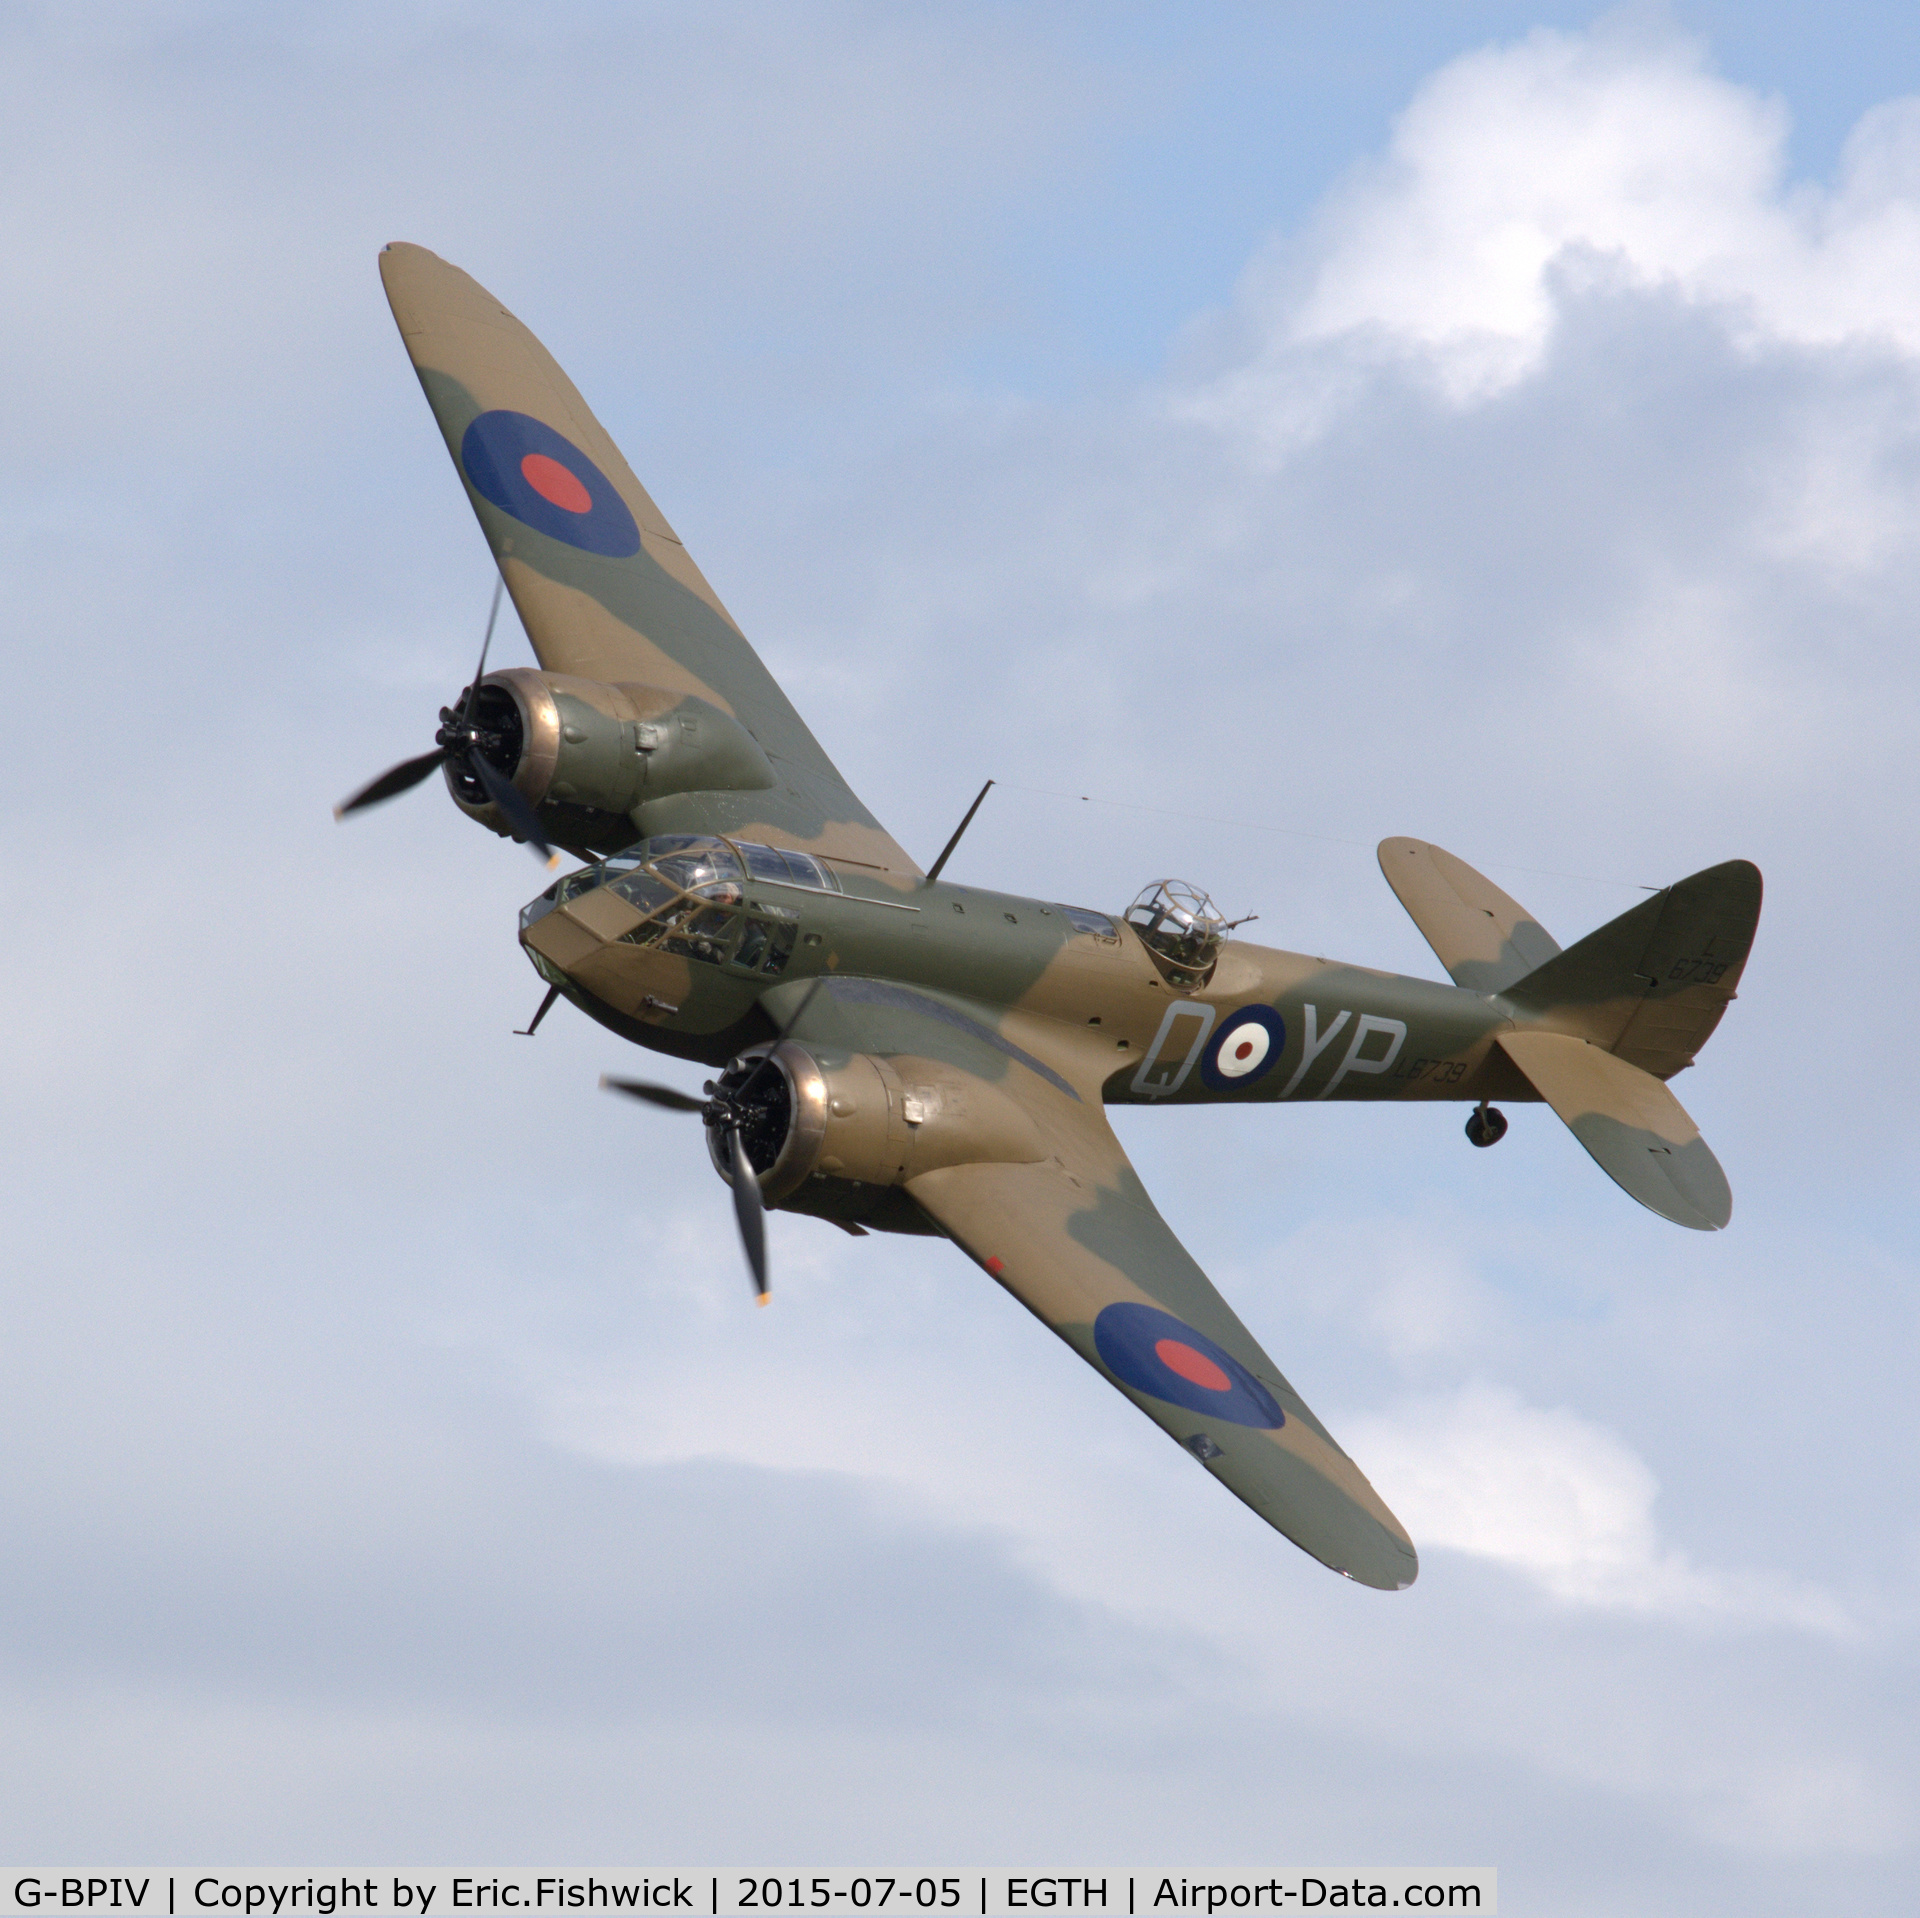 G-BPIV, 1943 Bristol 149 Bolingbroke Mk.IVT C/N 10201, 43. L6739 in display mode at the Shuttleworth Military Pagent Airshow, July 2015.